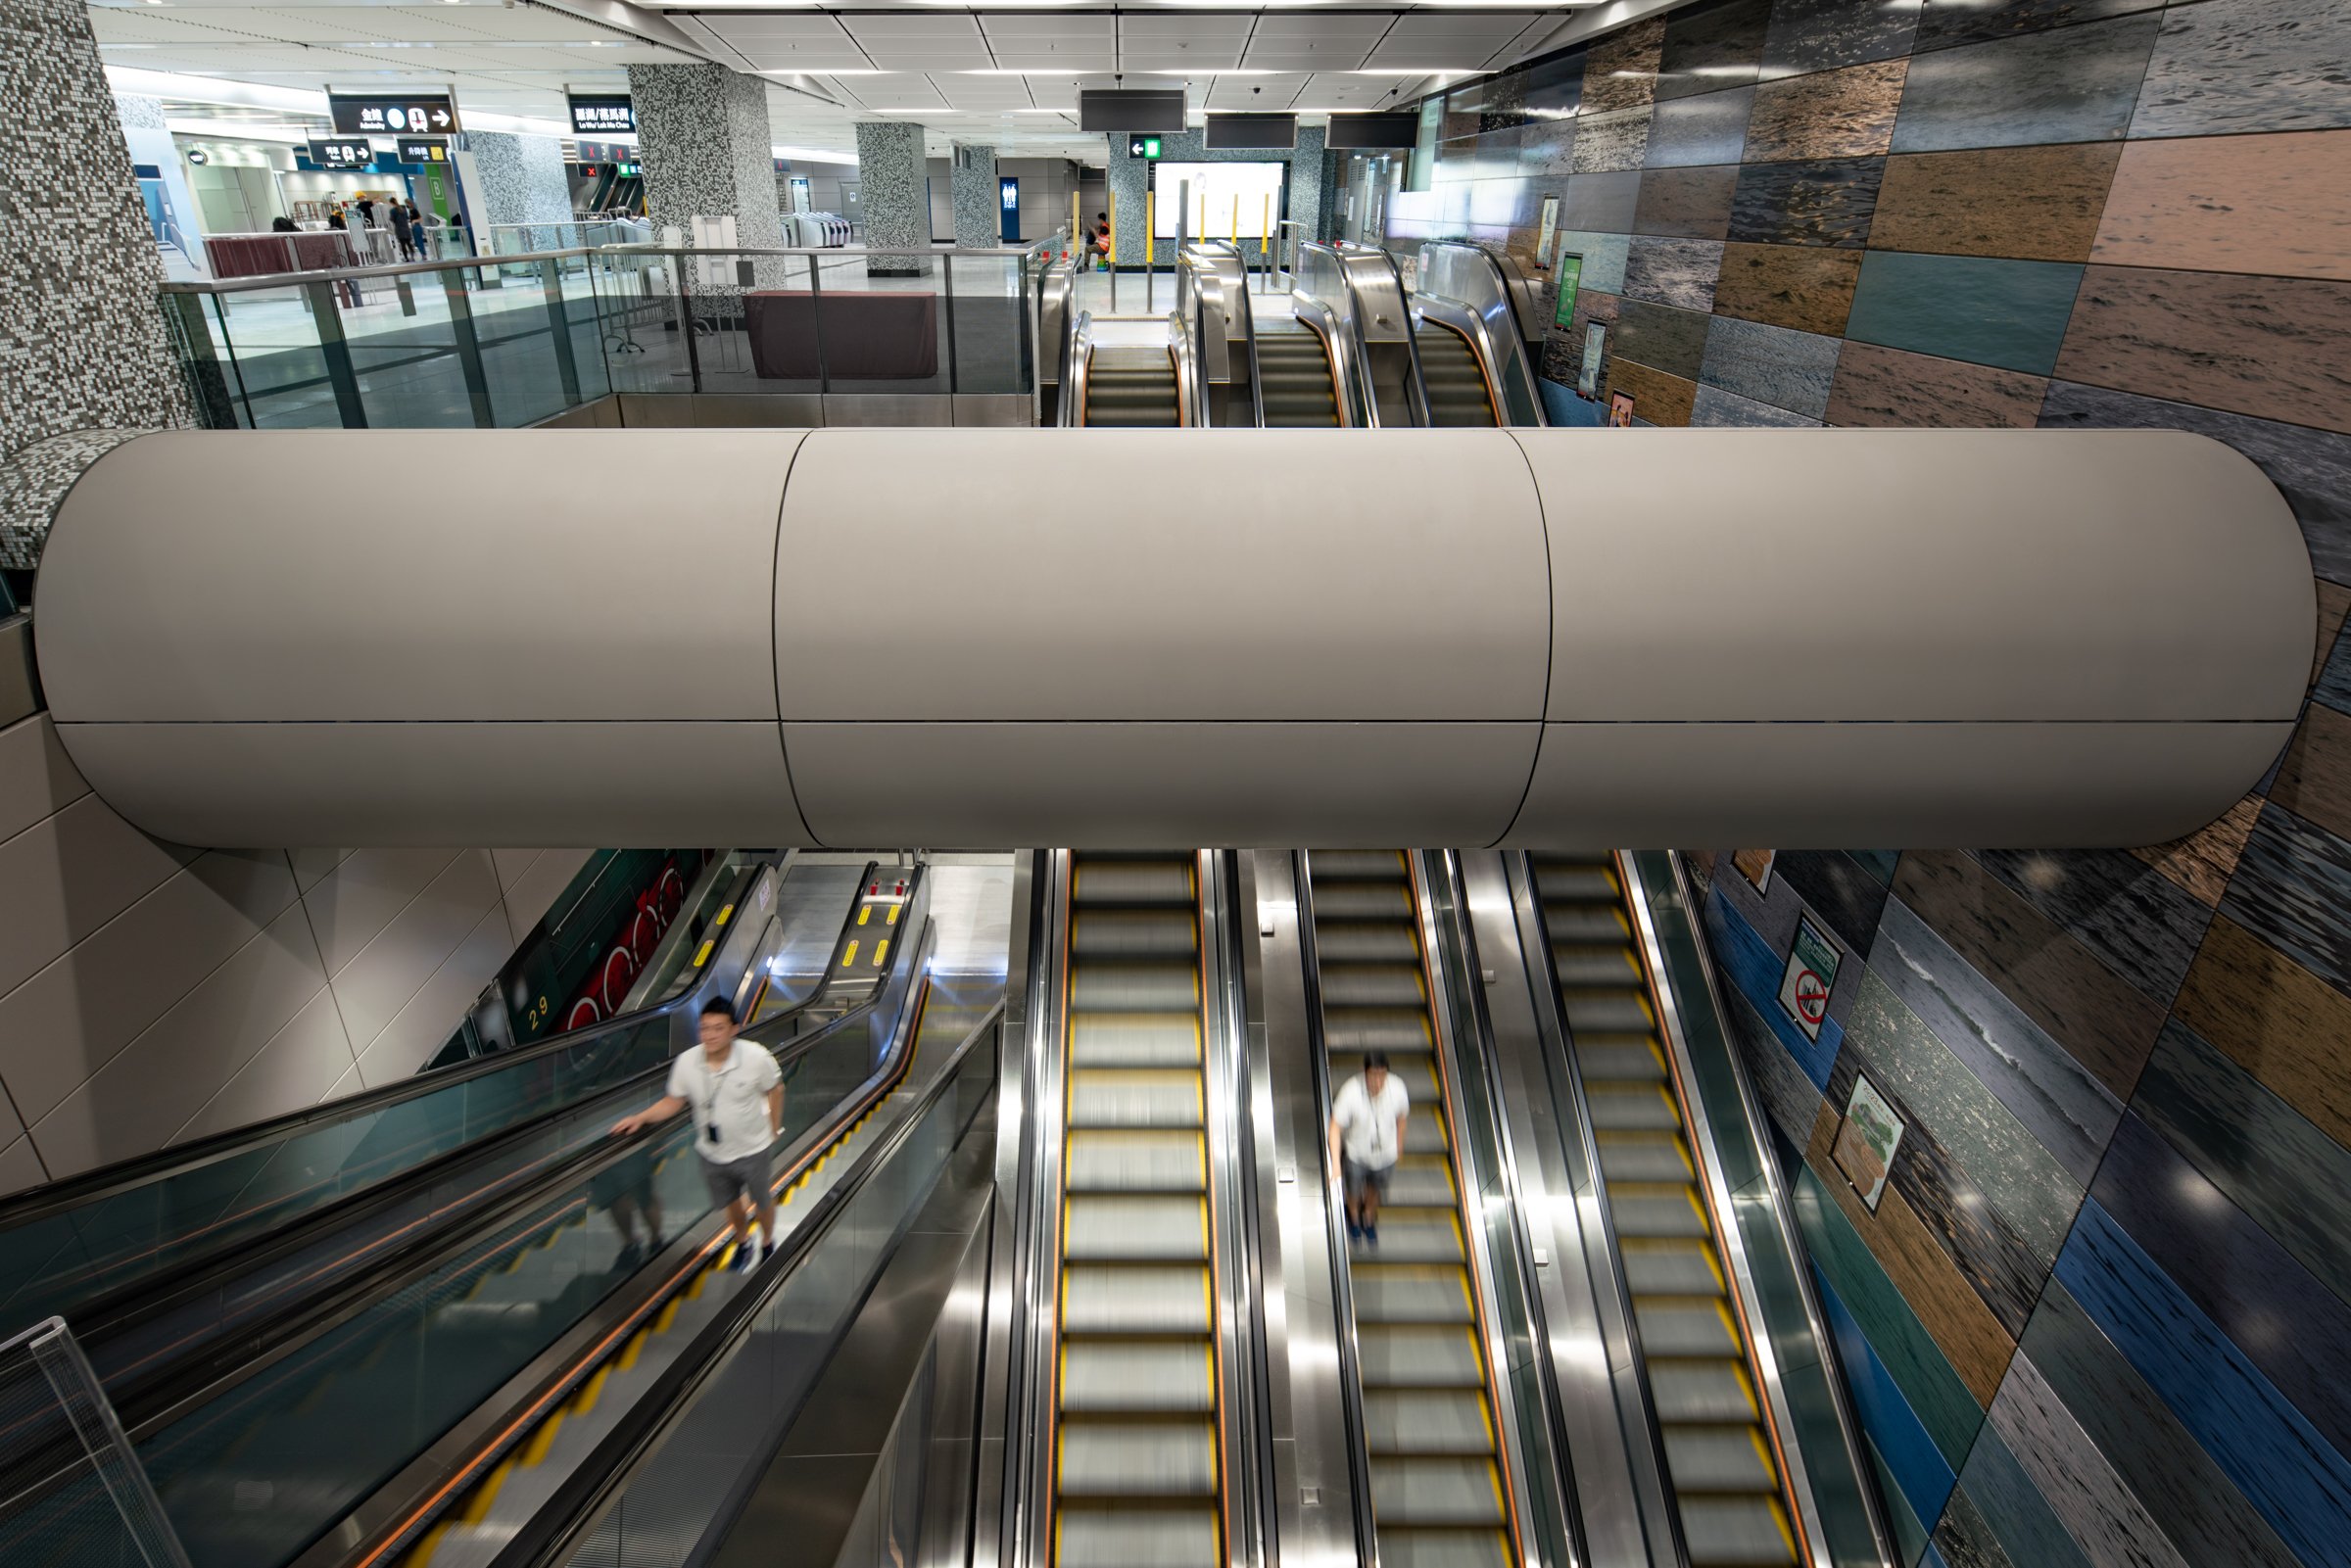  Exhibition Centre MTR Station East Rail Line  Designed by / Photographed for Farrells 